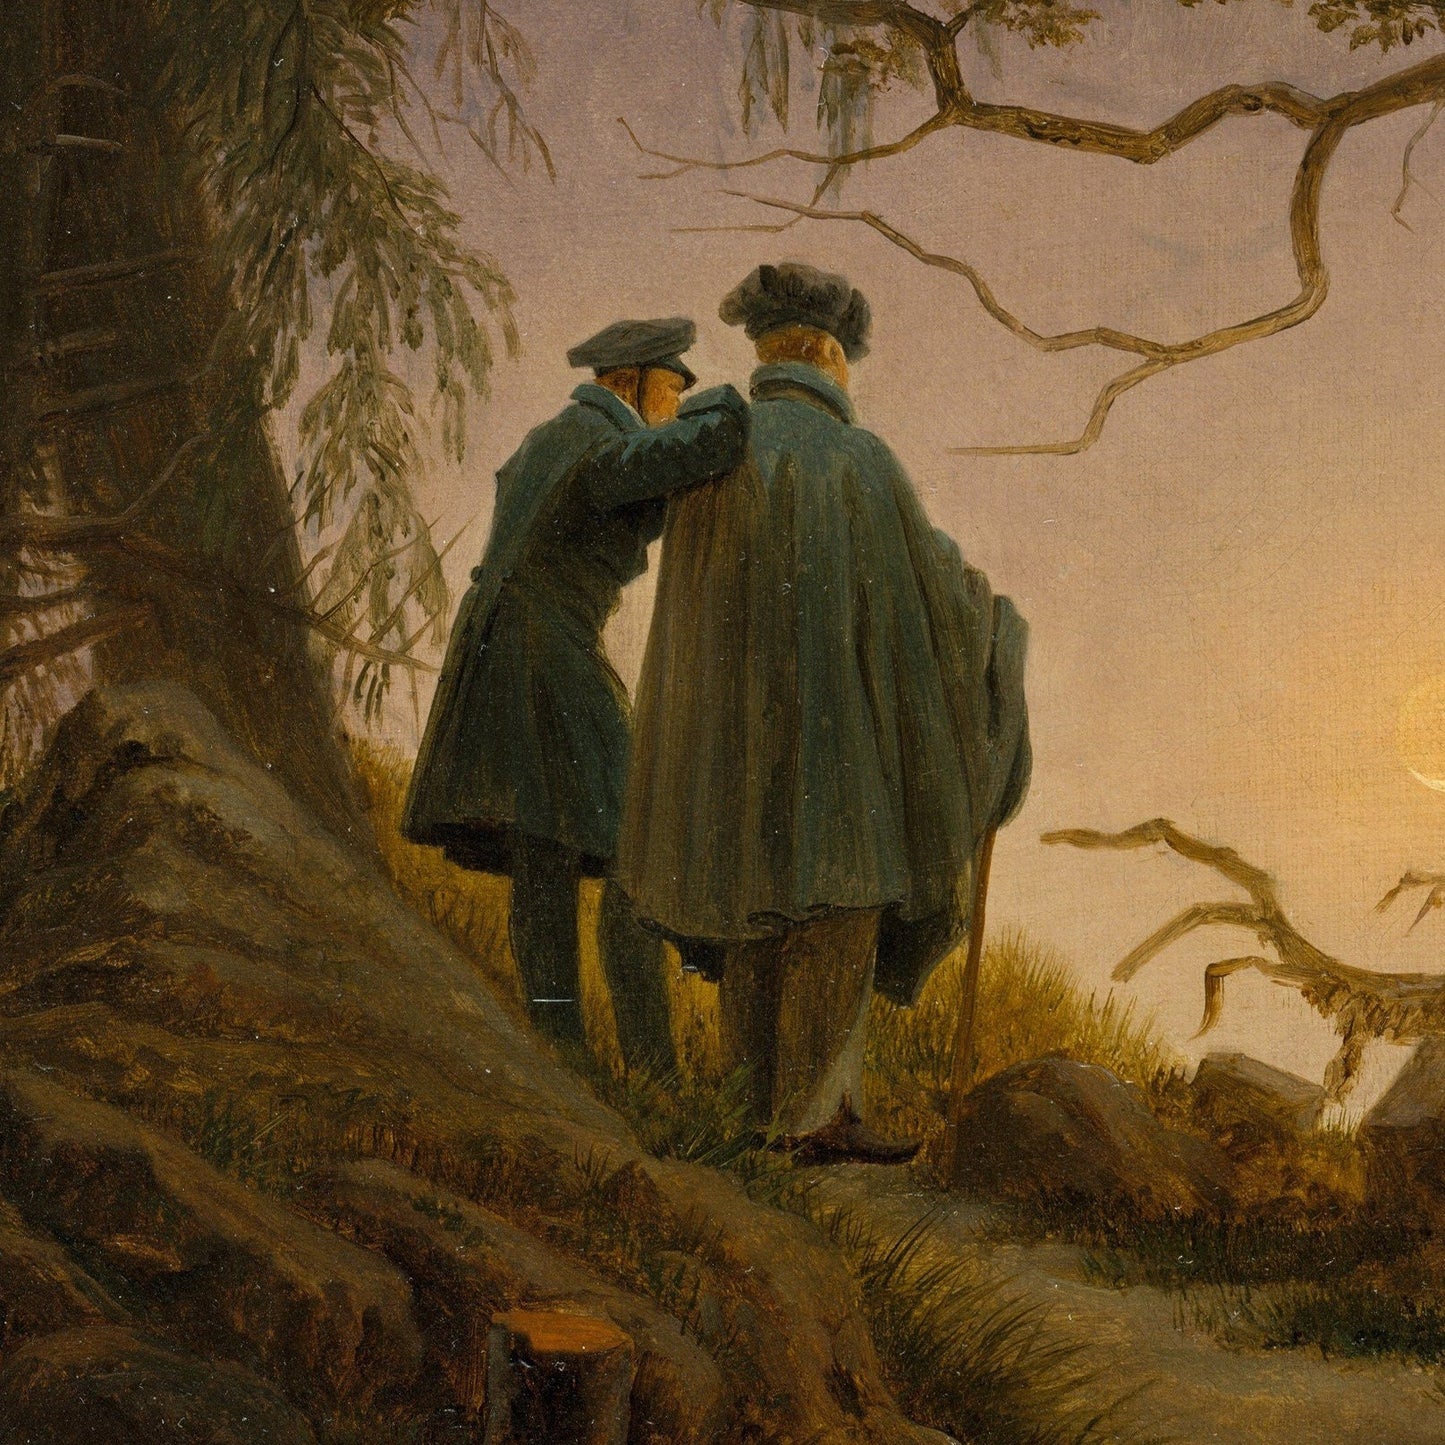 Two Men Contemplating by Caspar David Friedrich, 3d Printed with texture and brush strokes looks like original oil-painting, code:206